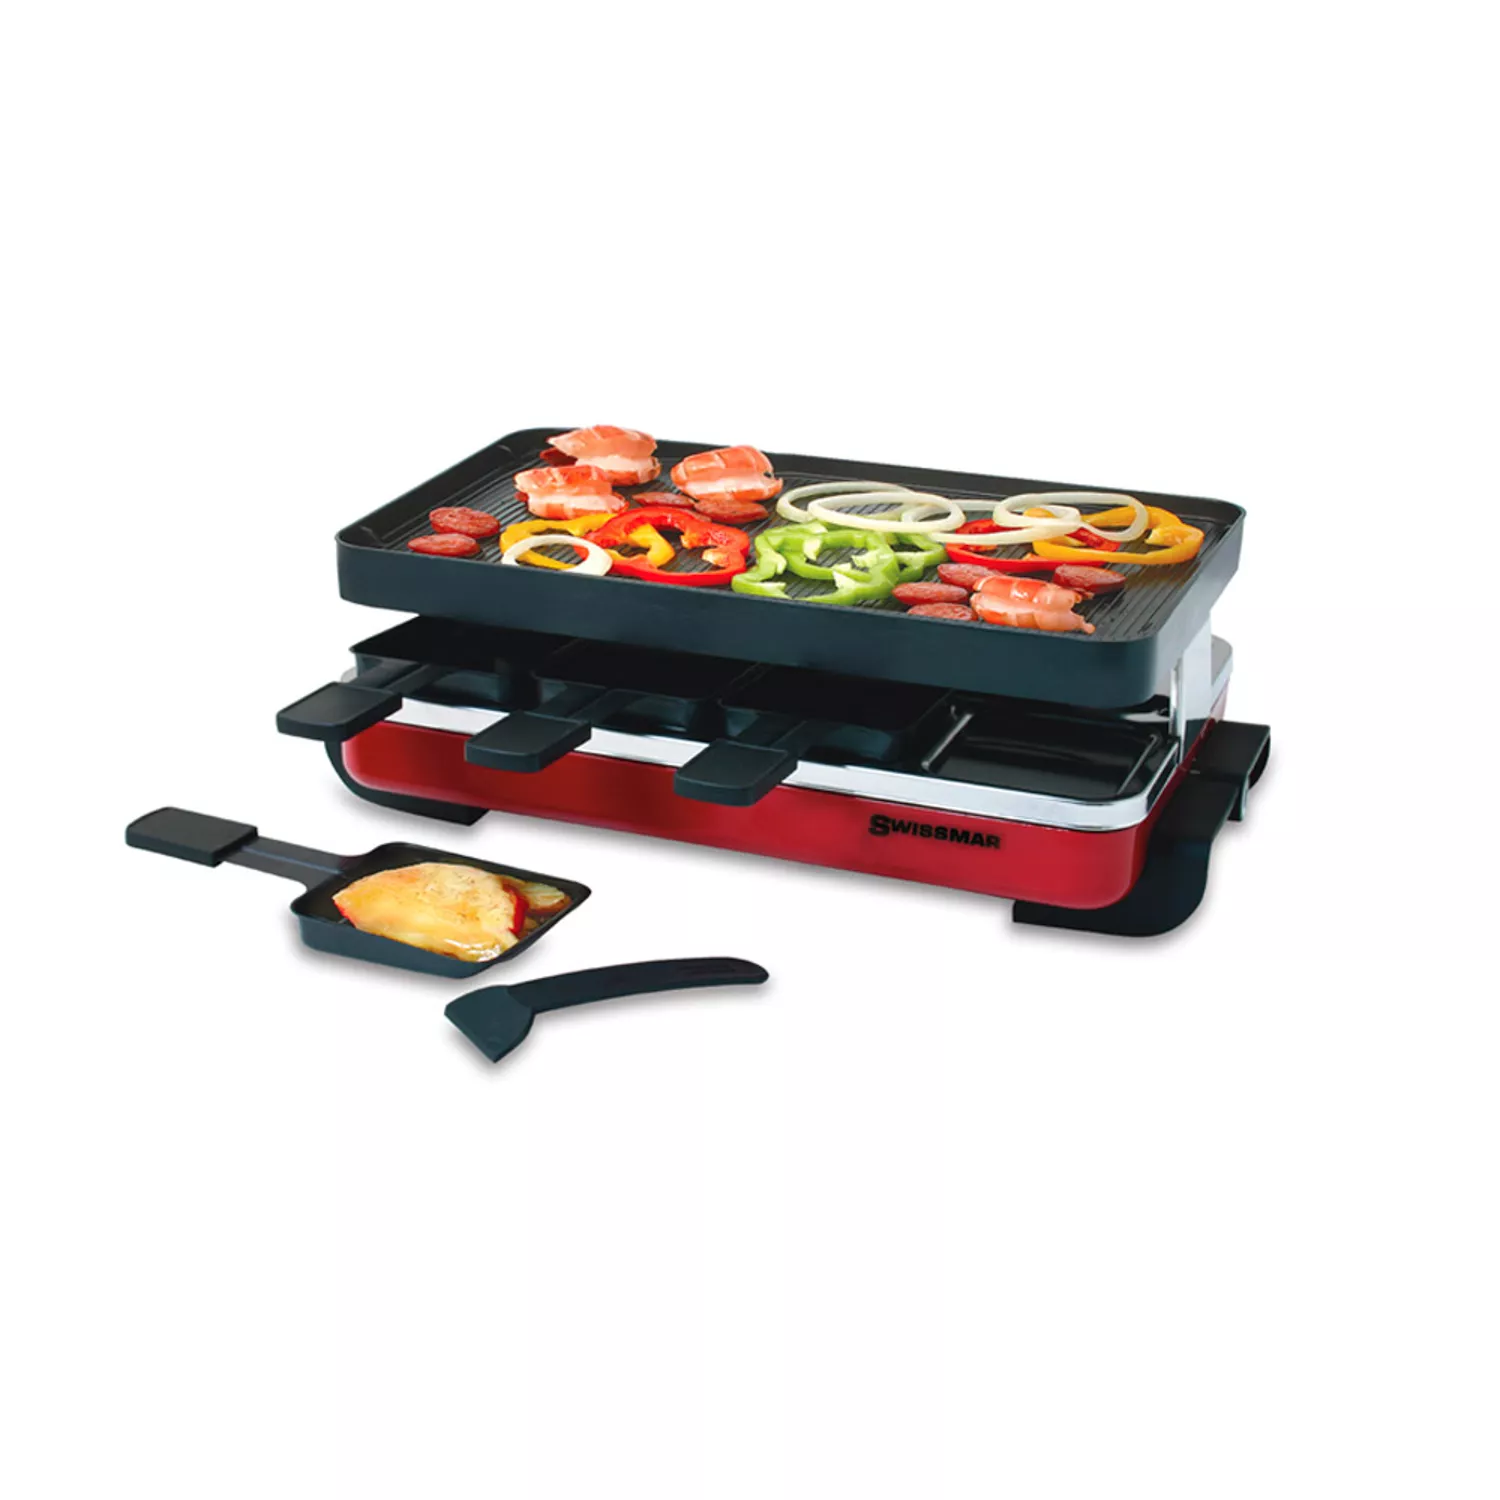 Swissmar Classic Raclette Party Grill with Reversible Grill Plate